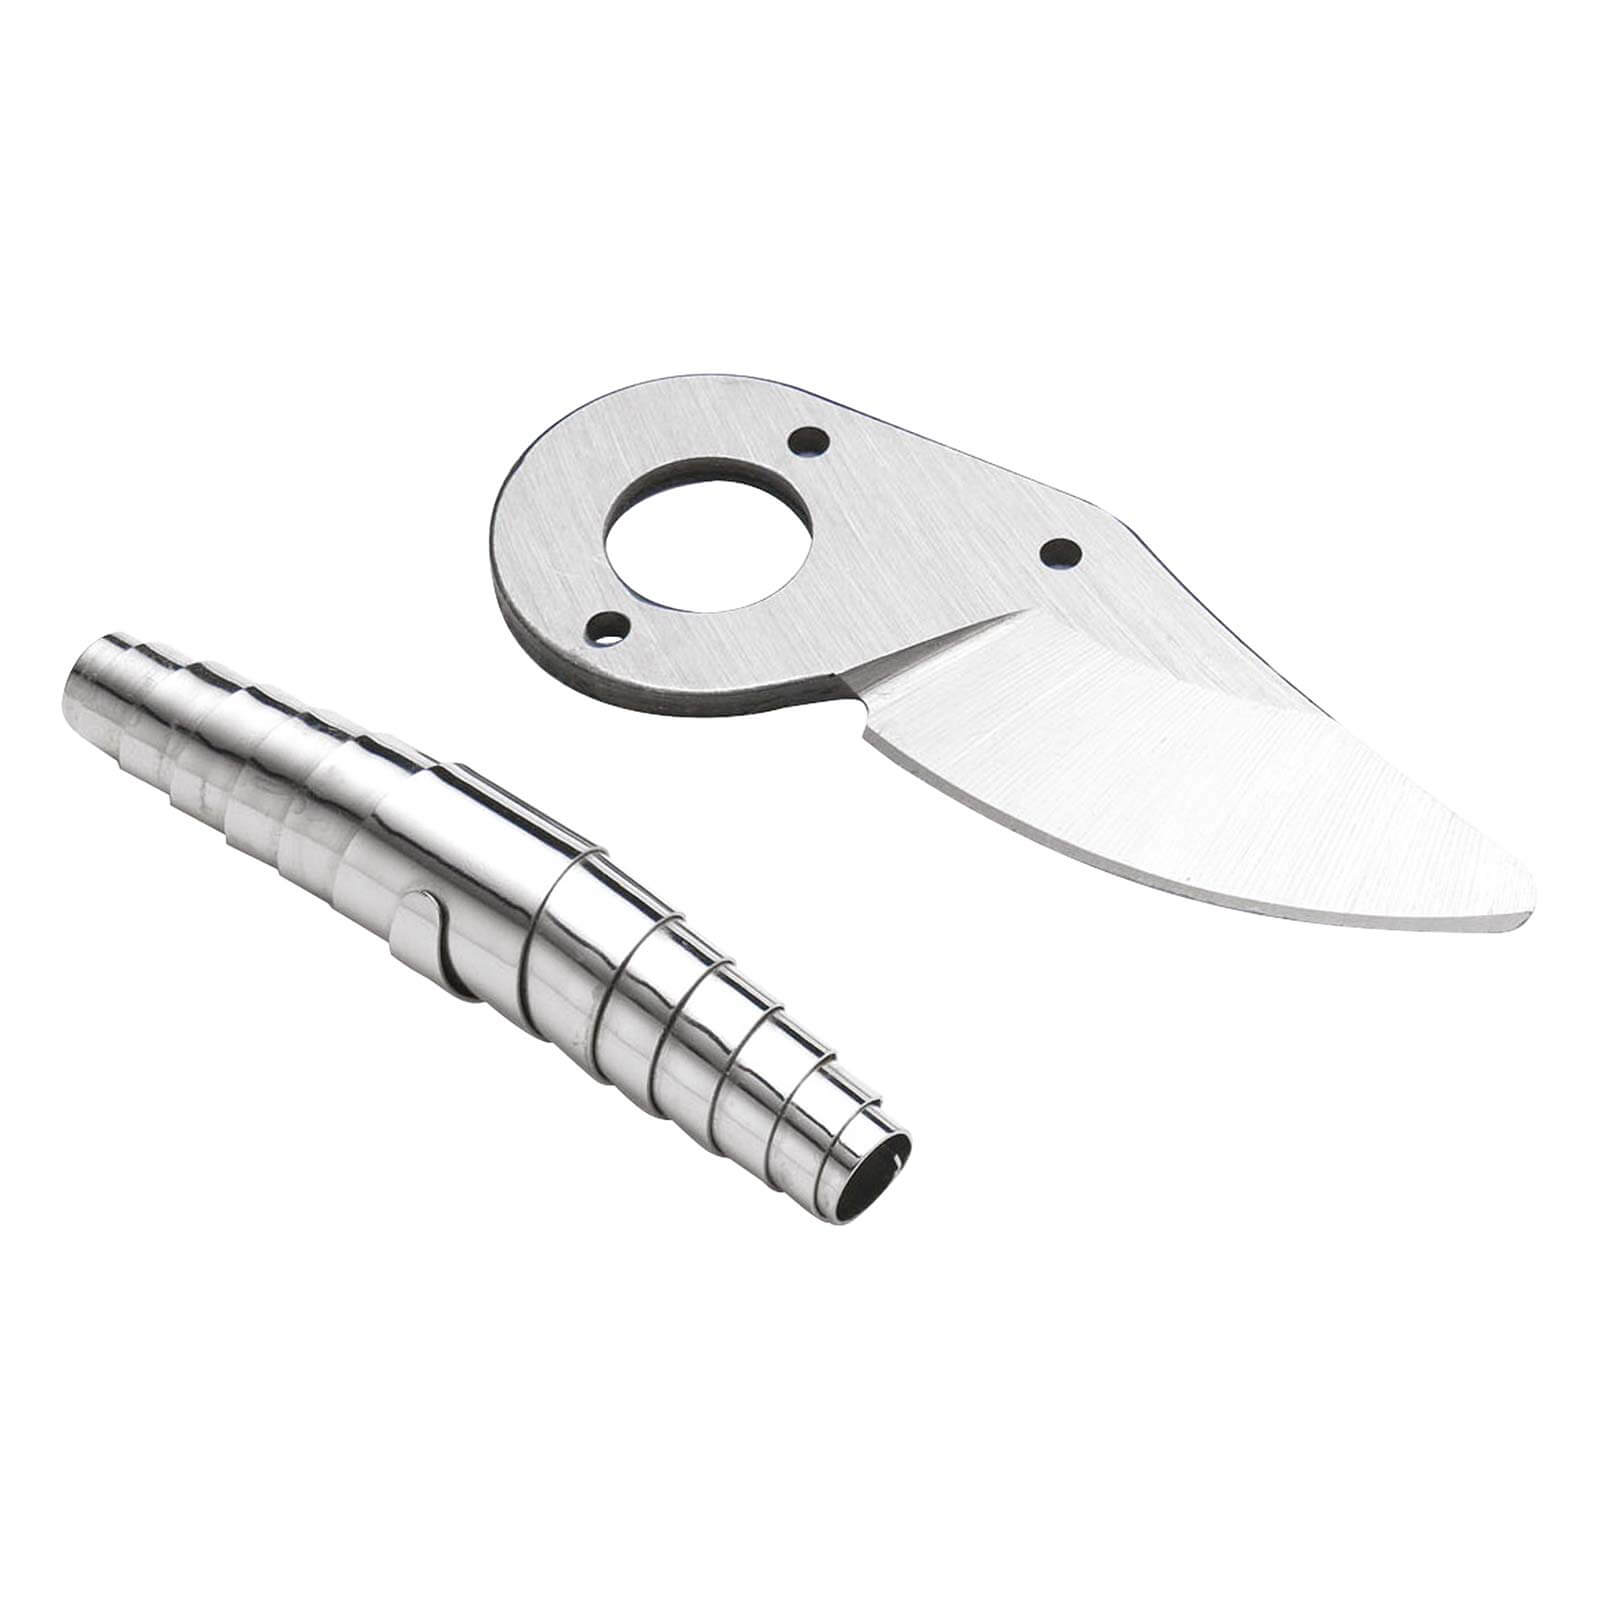 Image of Kew Gardens Spare Blade and Spring for 6959KEW Secateurs